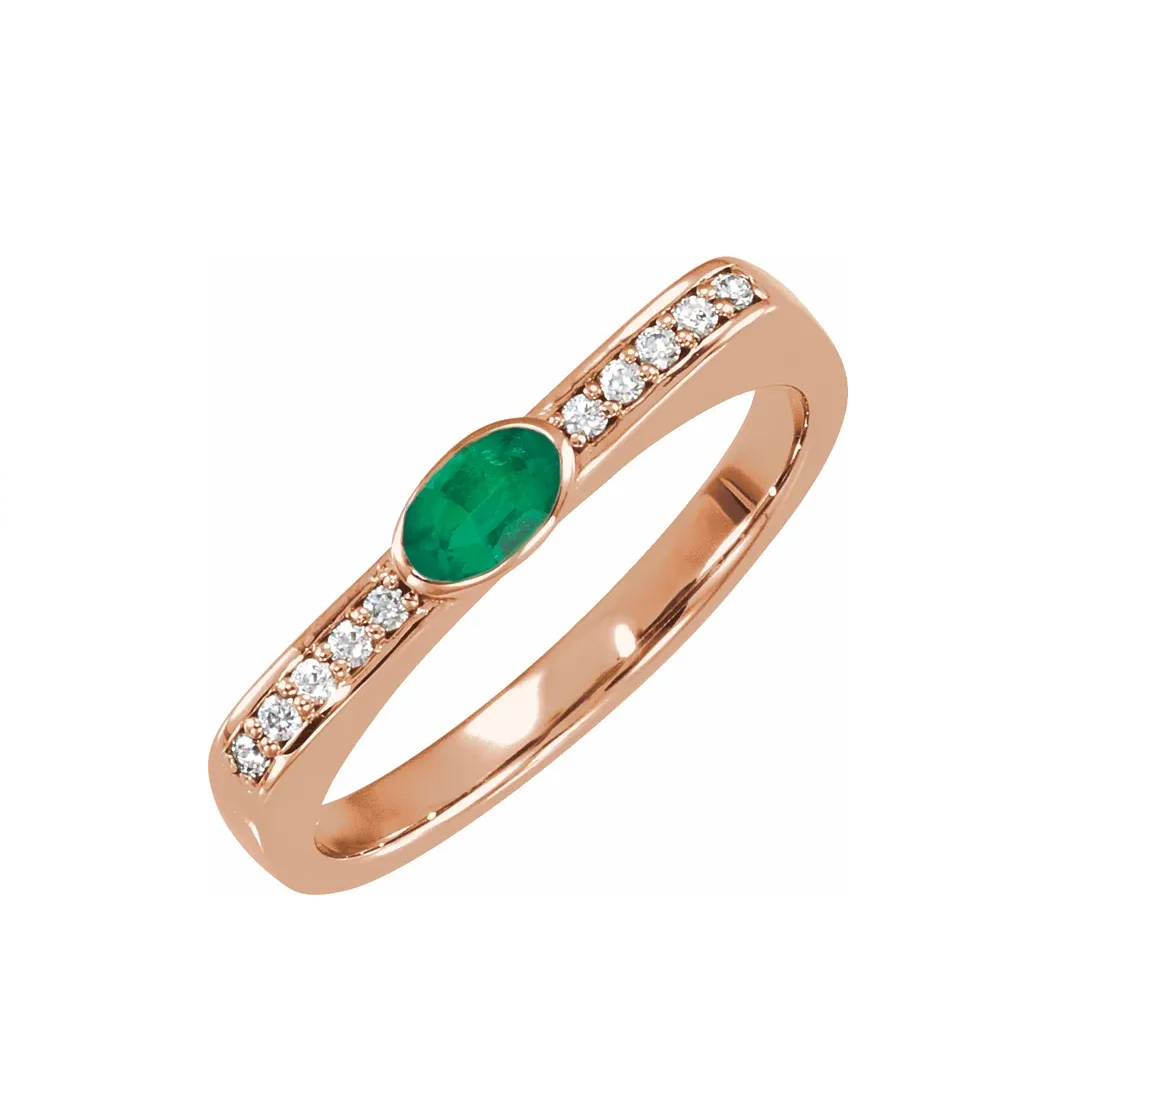 14K Gold Oval Emerald and Diamond Accented Ring